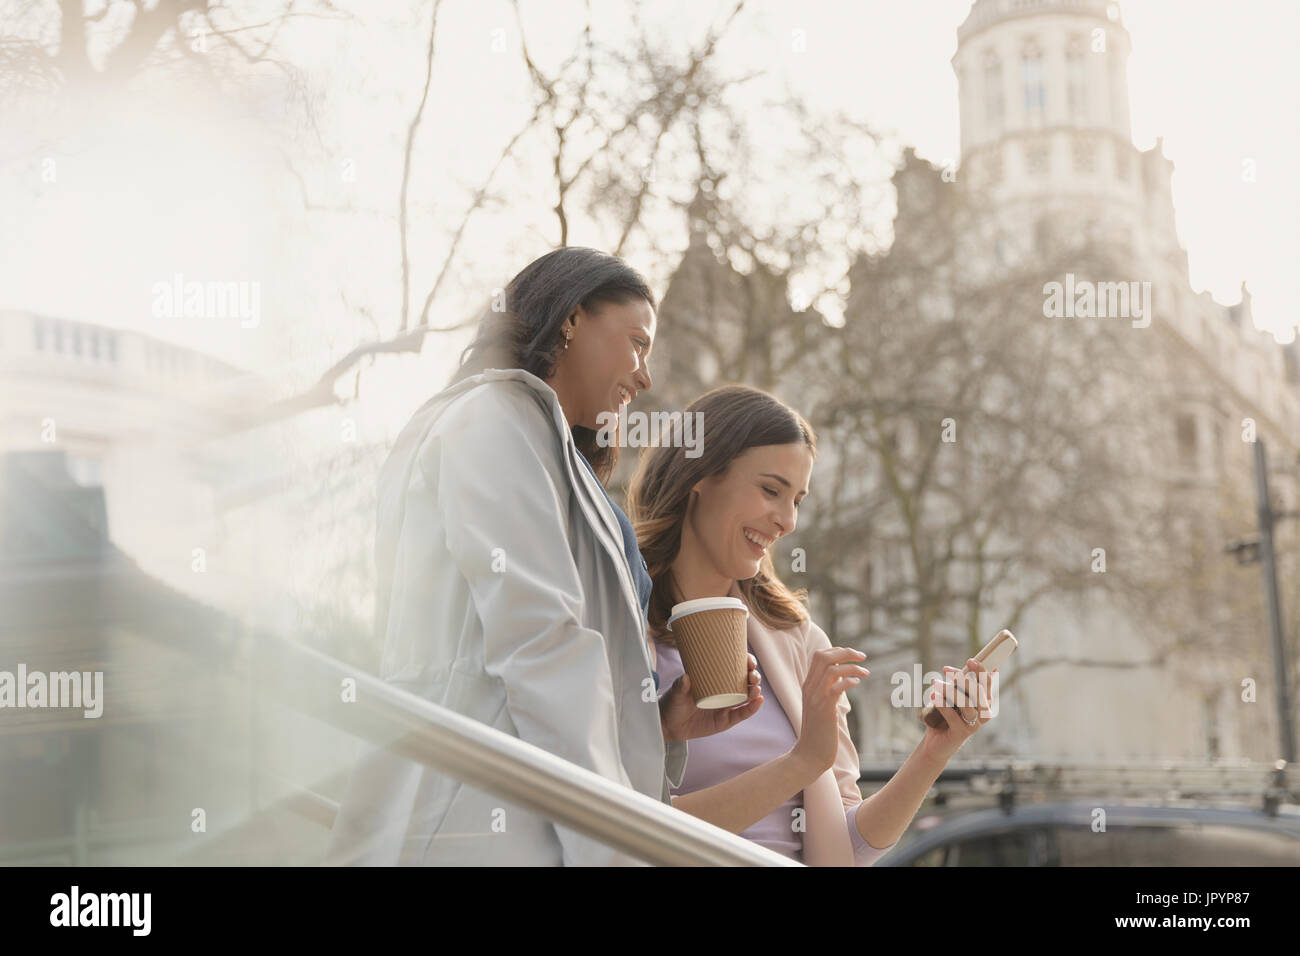 Smiling women friends drinking coffee and using cell phone in city Banque D'Images